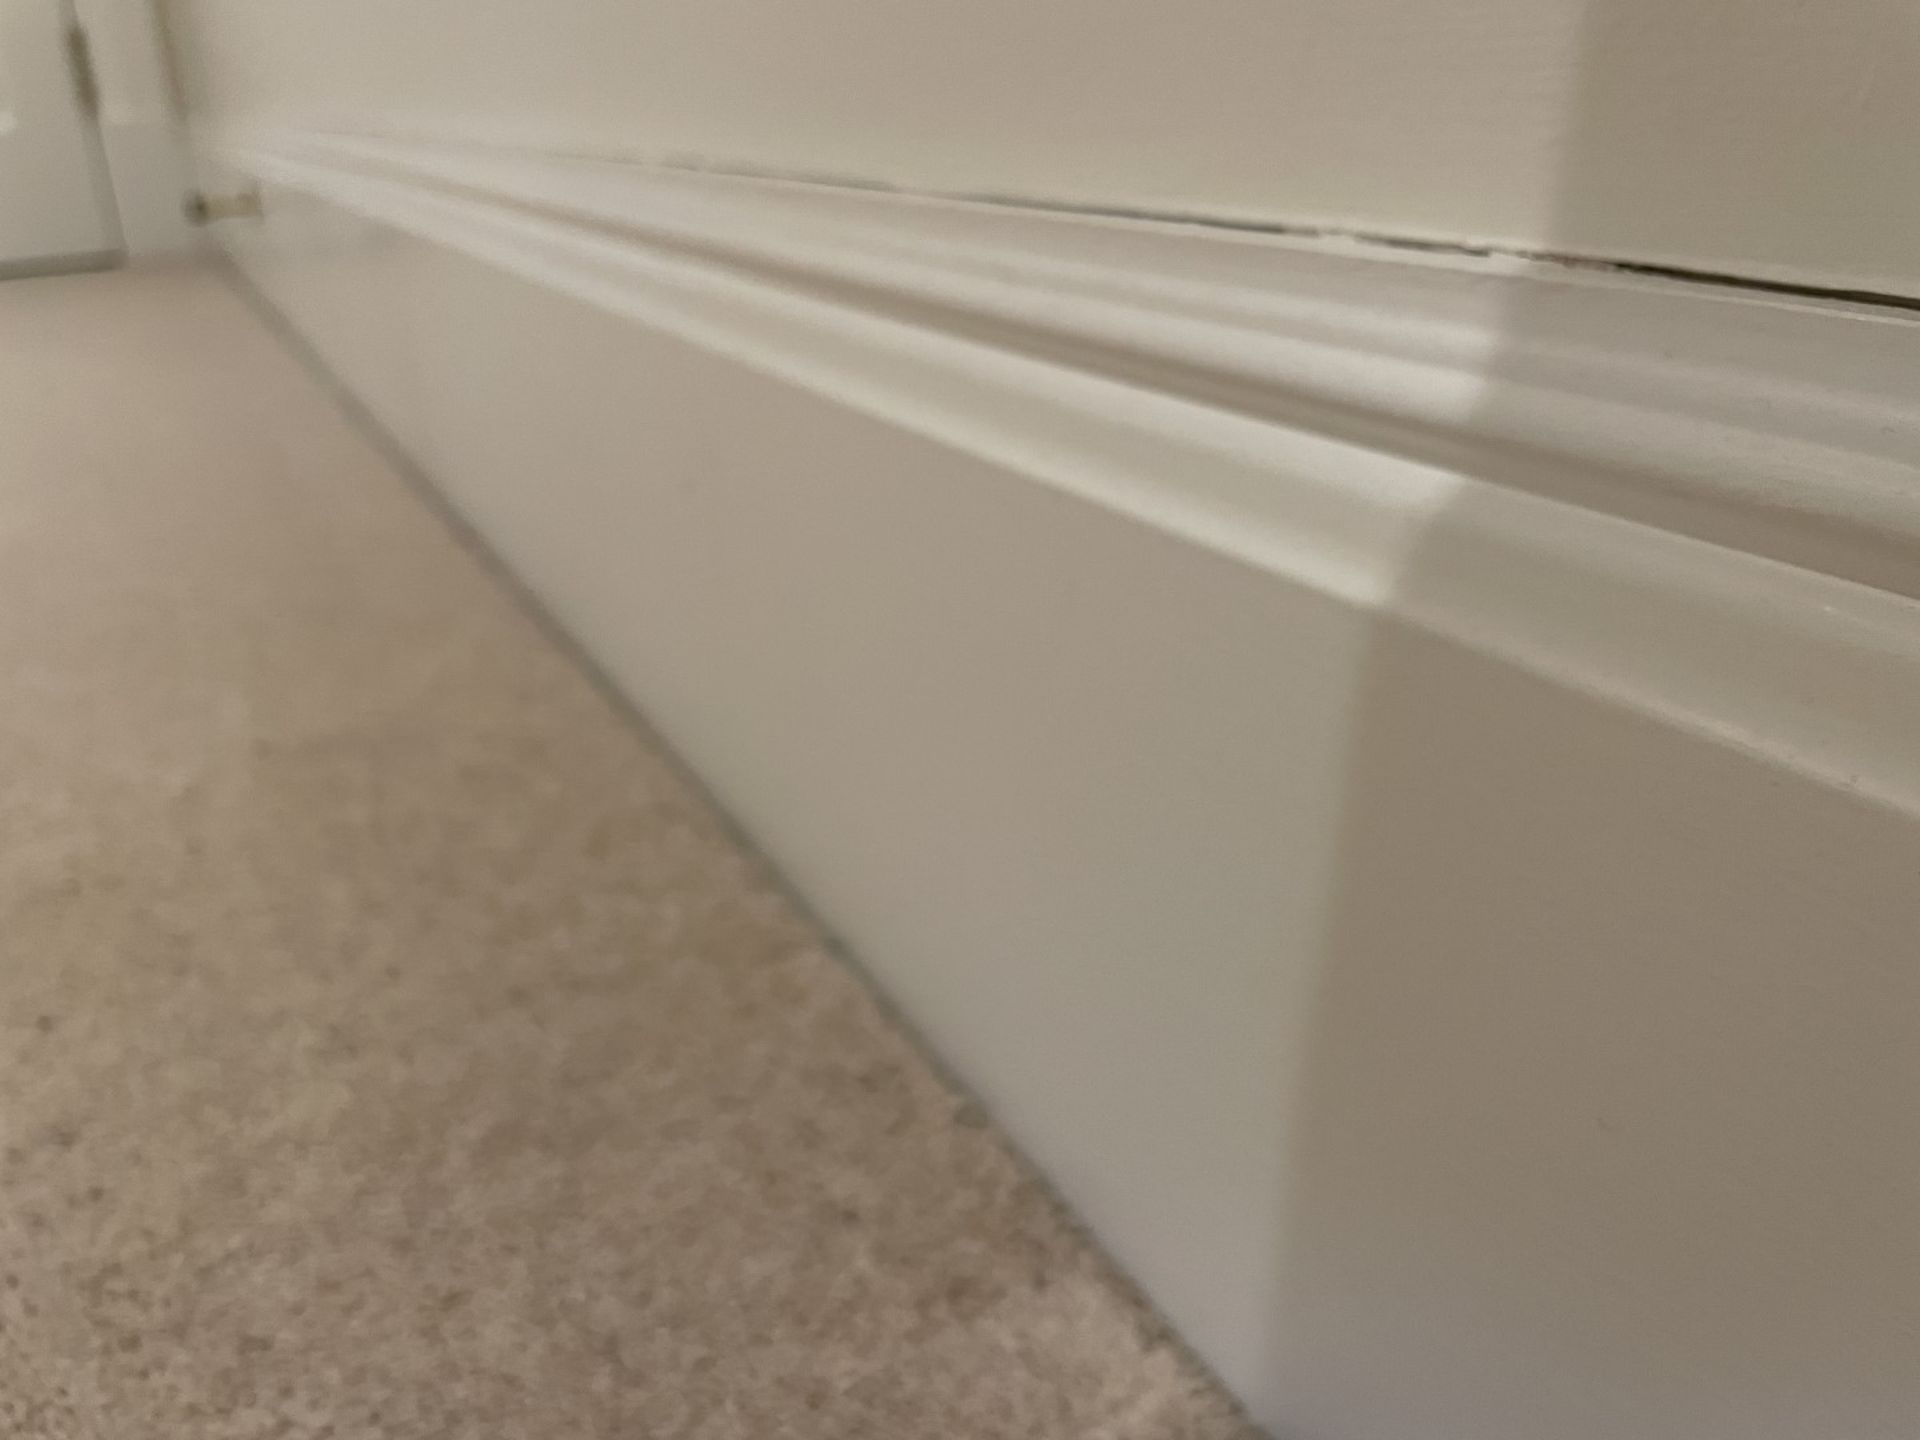 Approximately 12-Metres of Painted Timber Wooden Skirting Boards, In White - Ref: PAN291 - Image 3 of 6